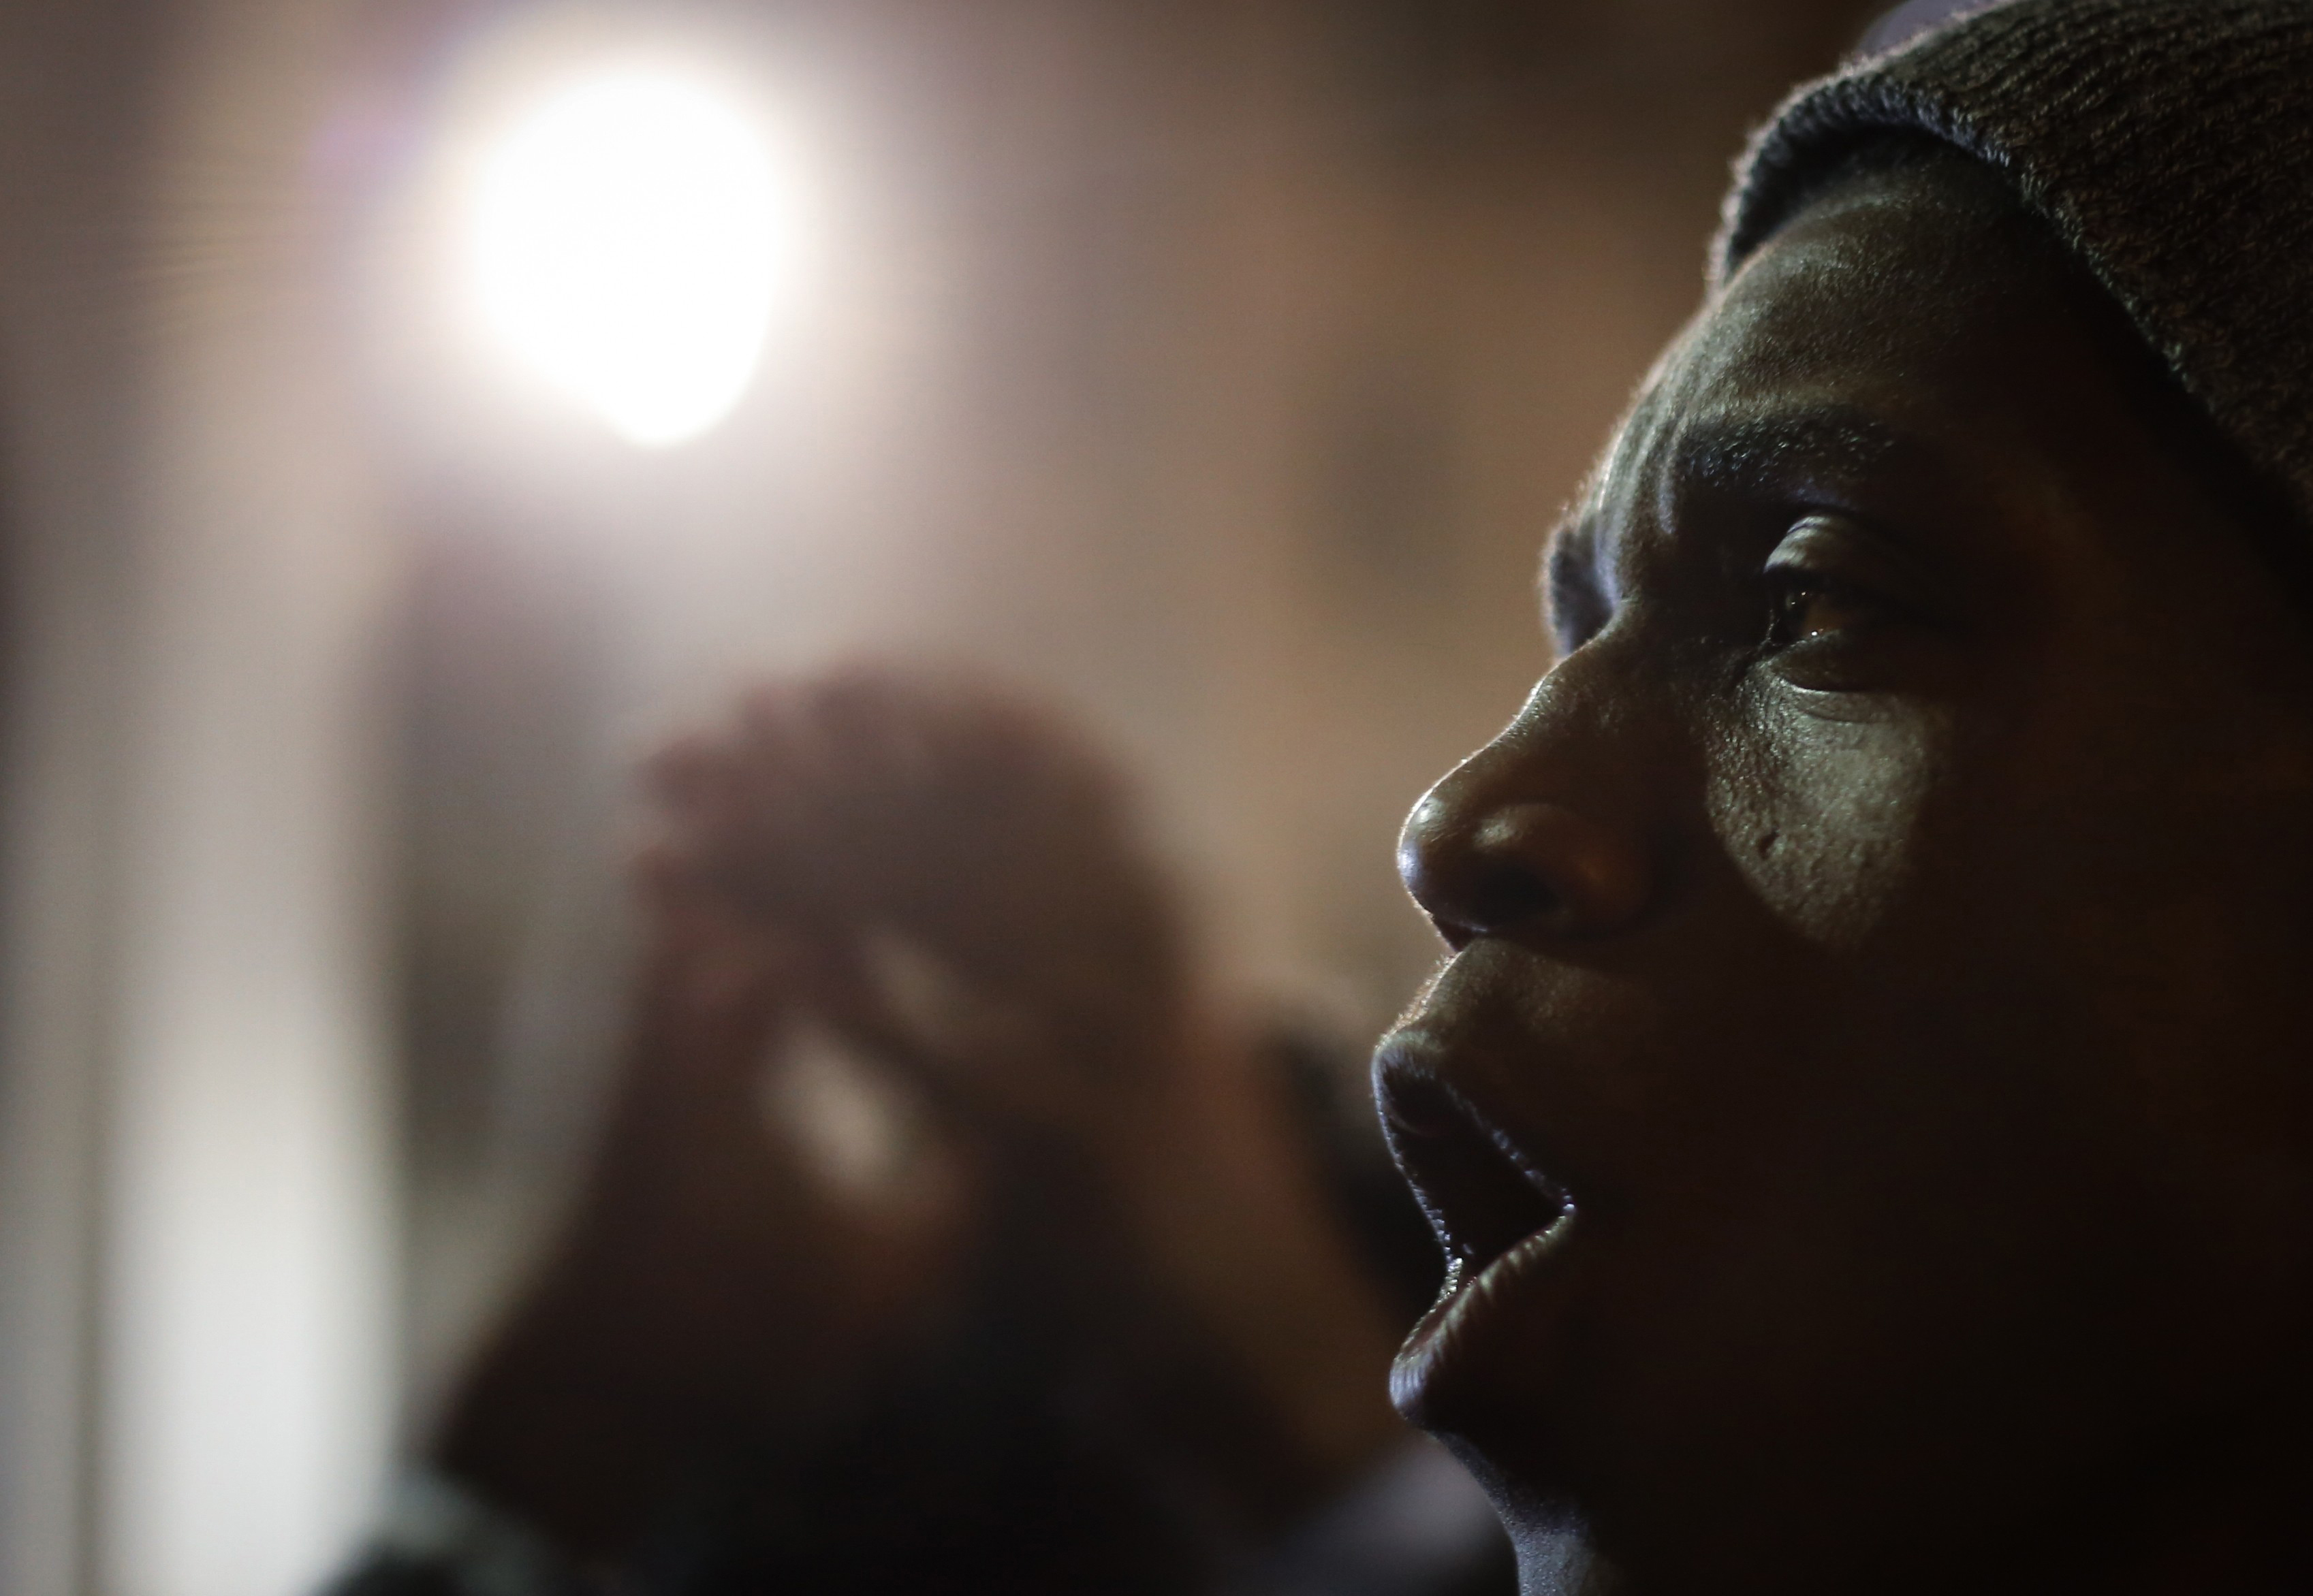 Protests Continue in New York After Grand Jury Decision on Eric Garner's case